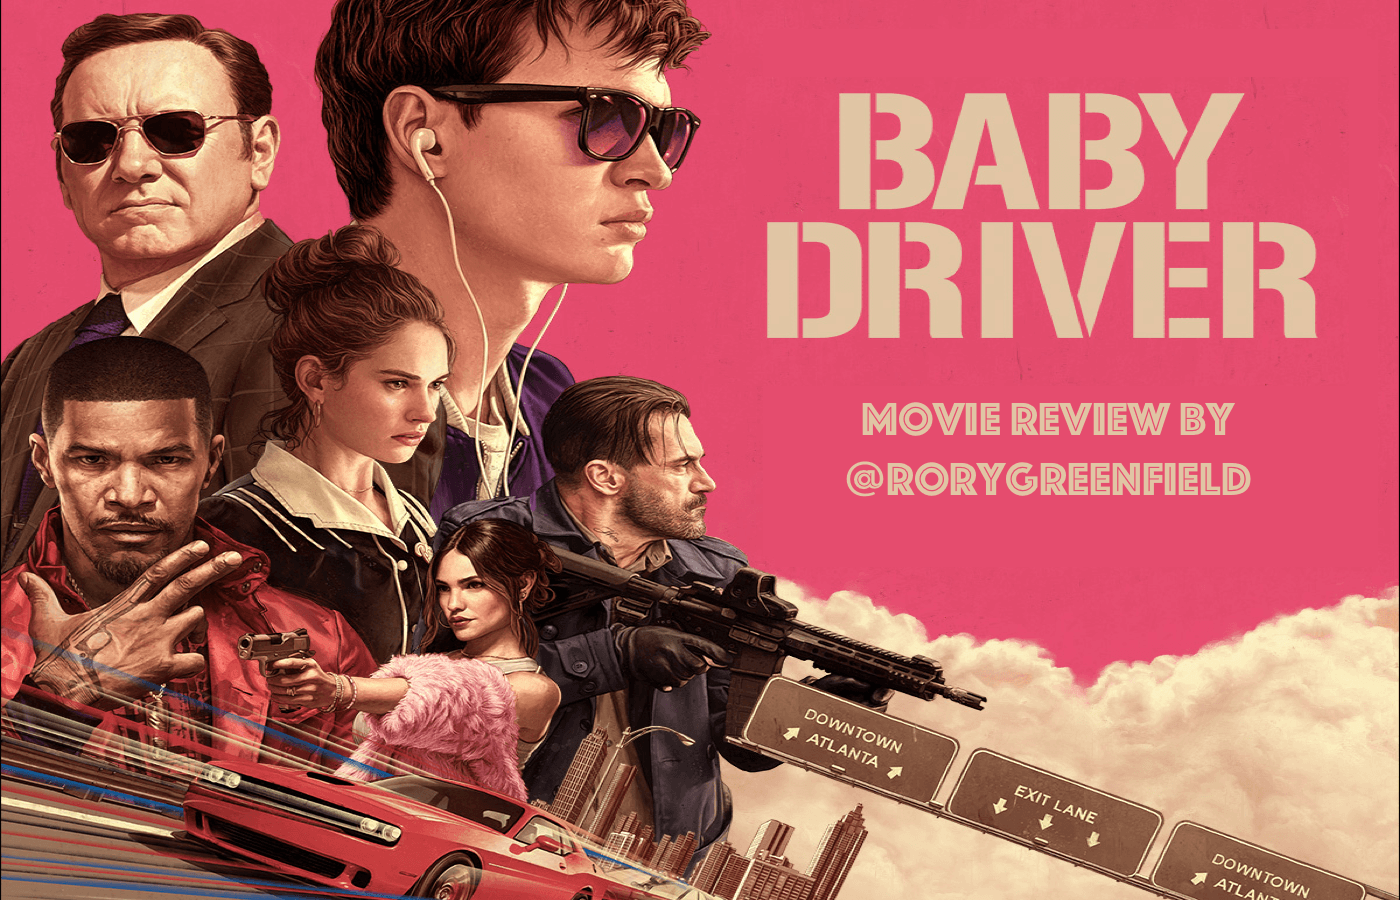 https://anfieldindex.com/wp-content/uploads/babydriver-Review.png